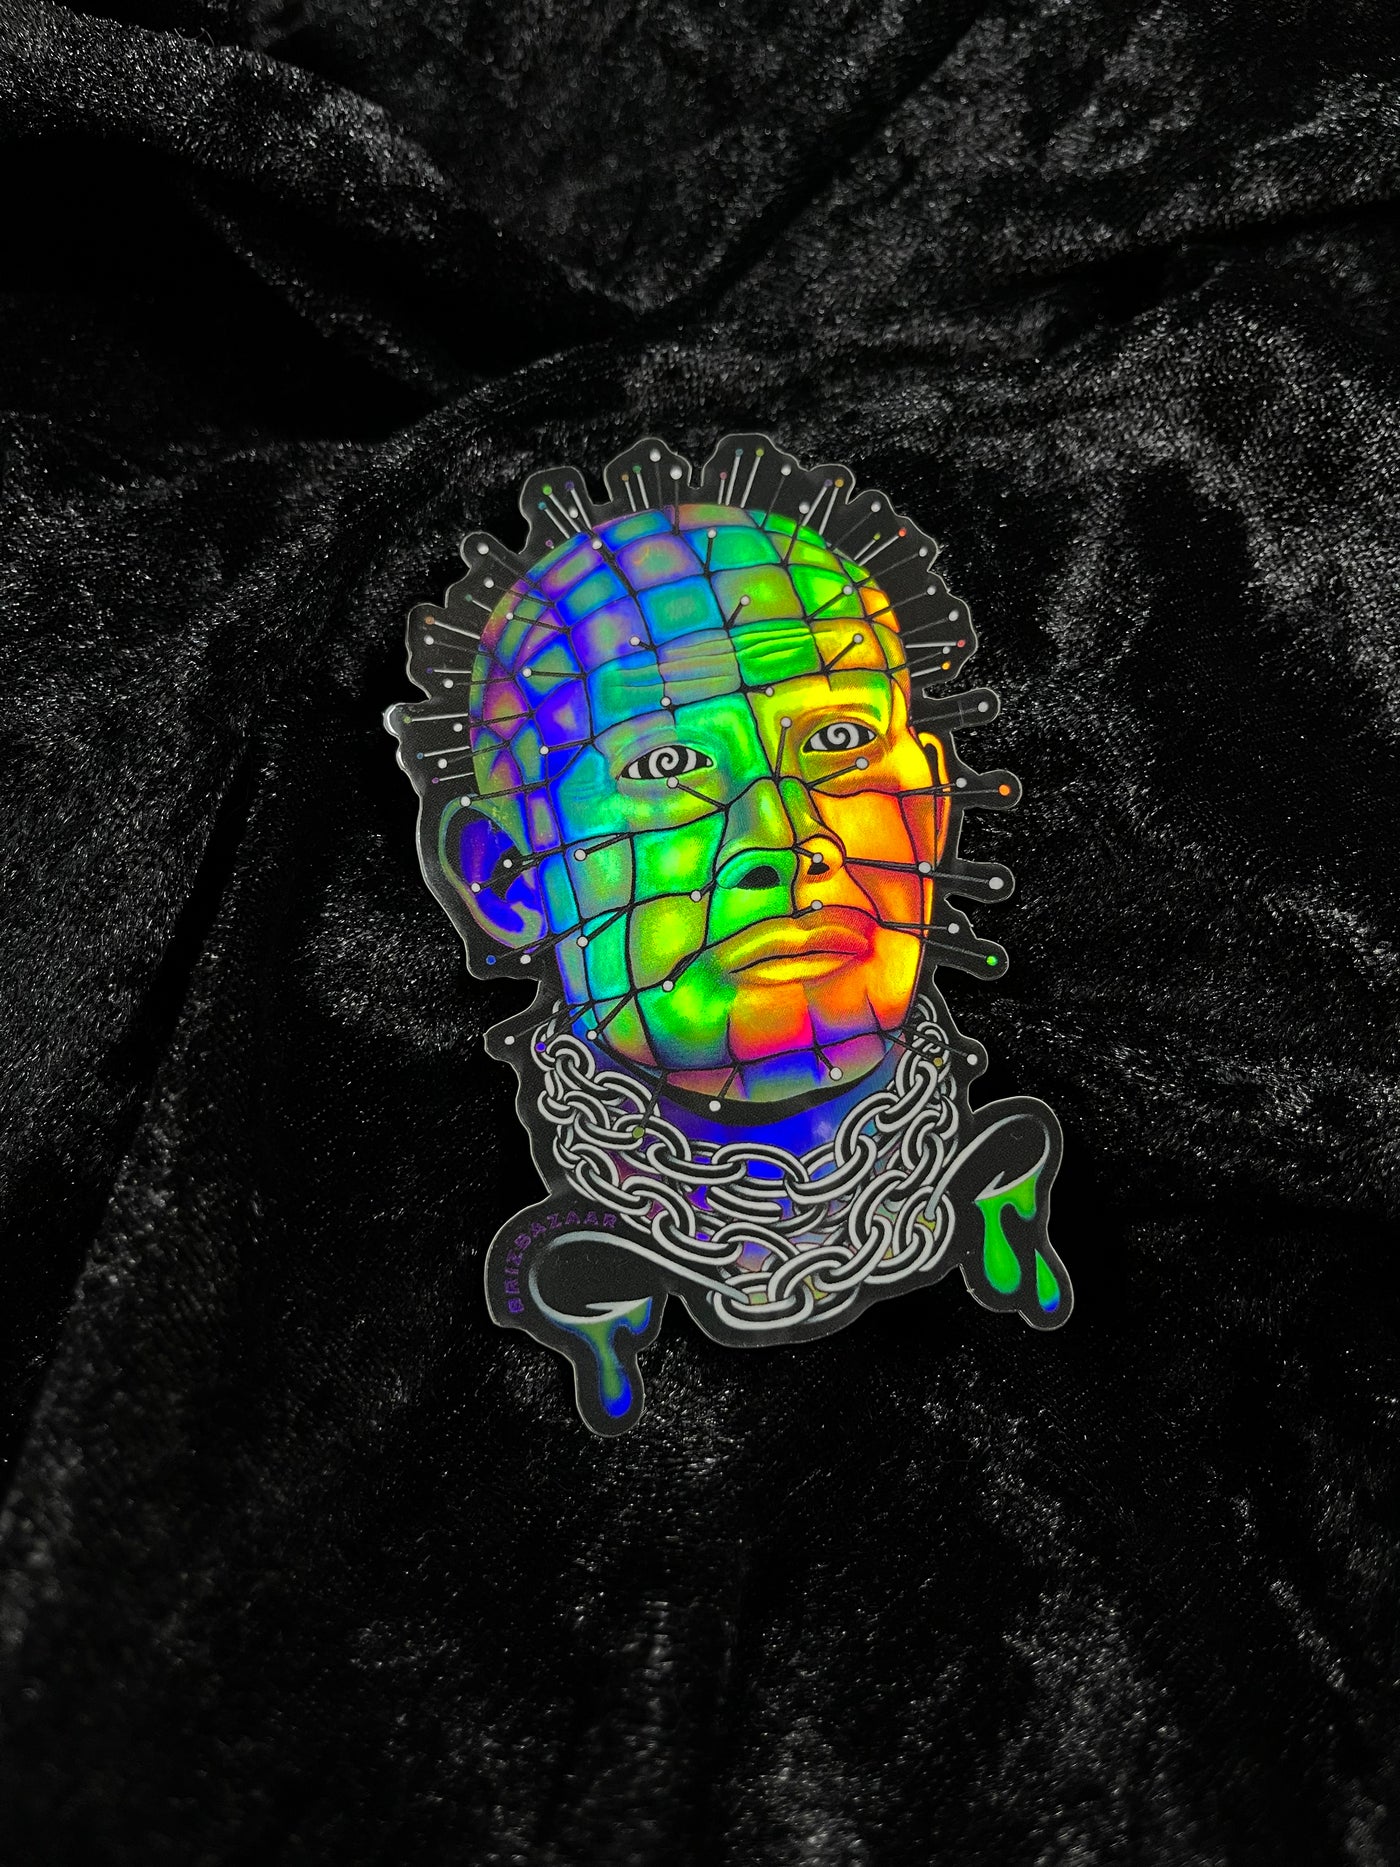 Holographic sticker of HellRaver